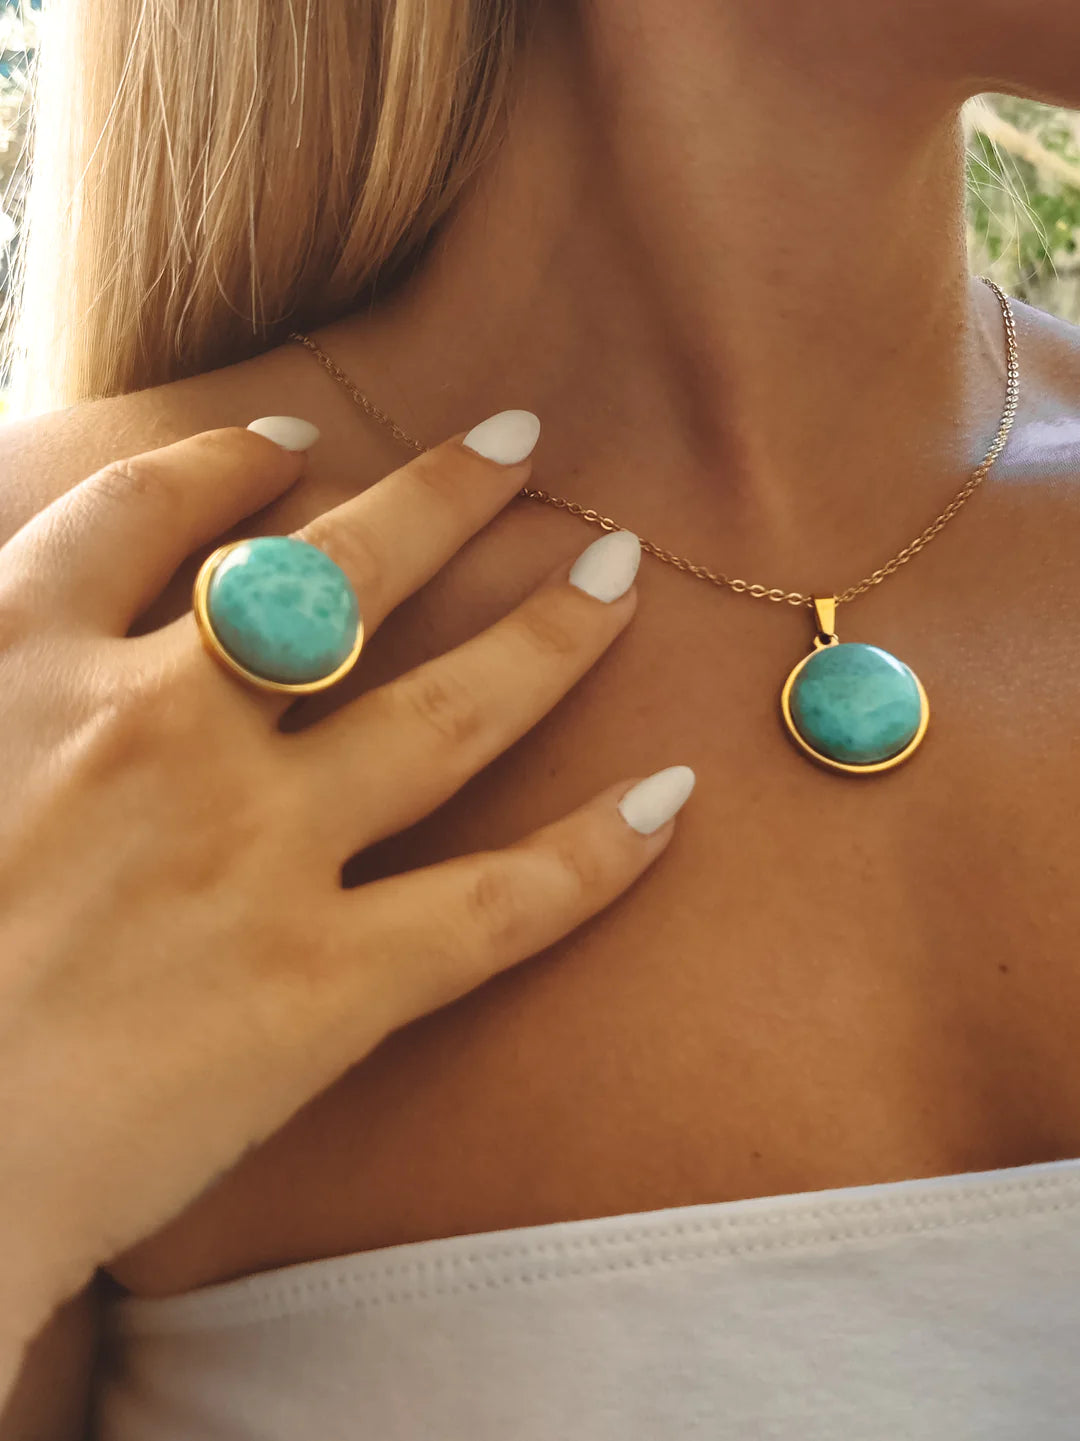 Learn all about the Mystique of Larimar: Spiritual Meaning, Benefits and what makes this stone truly special